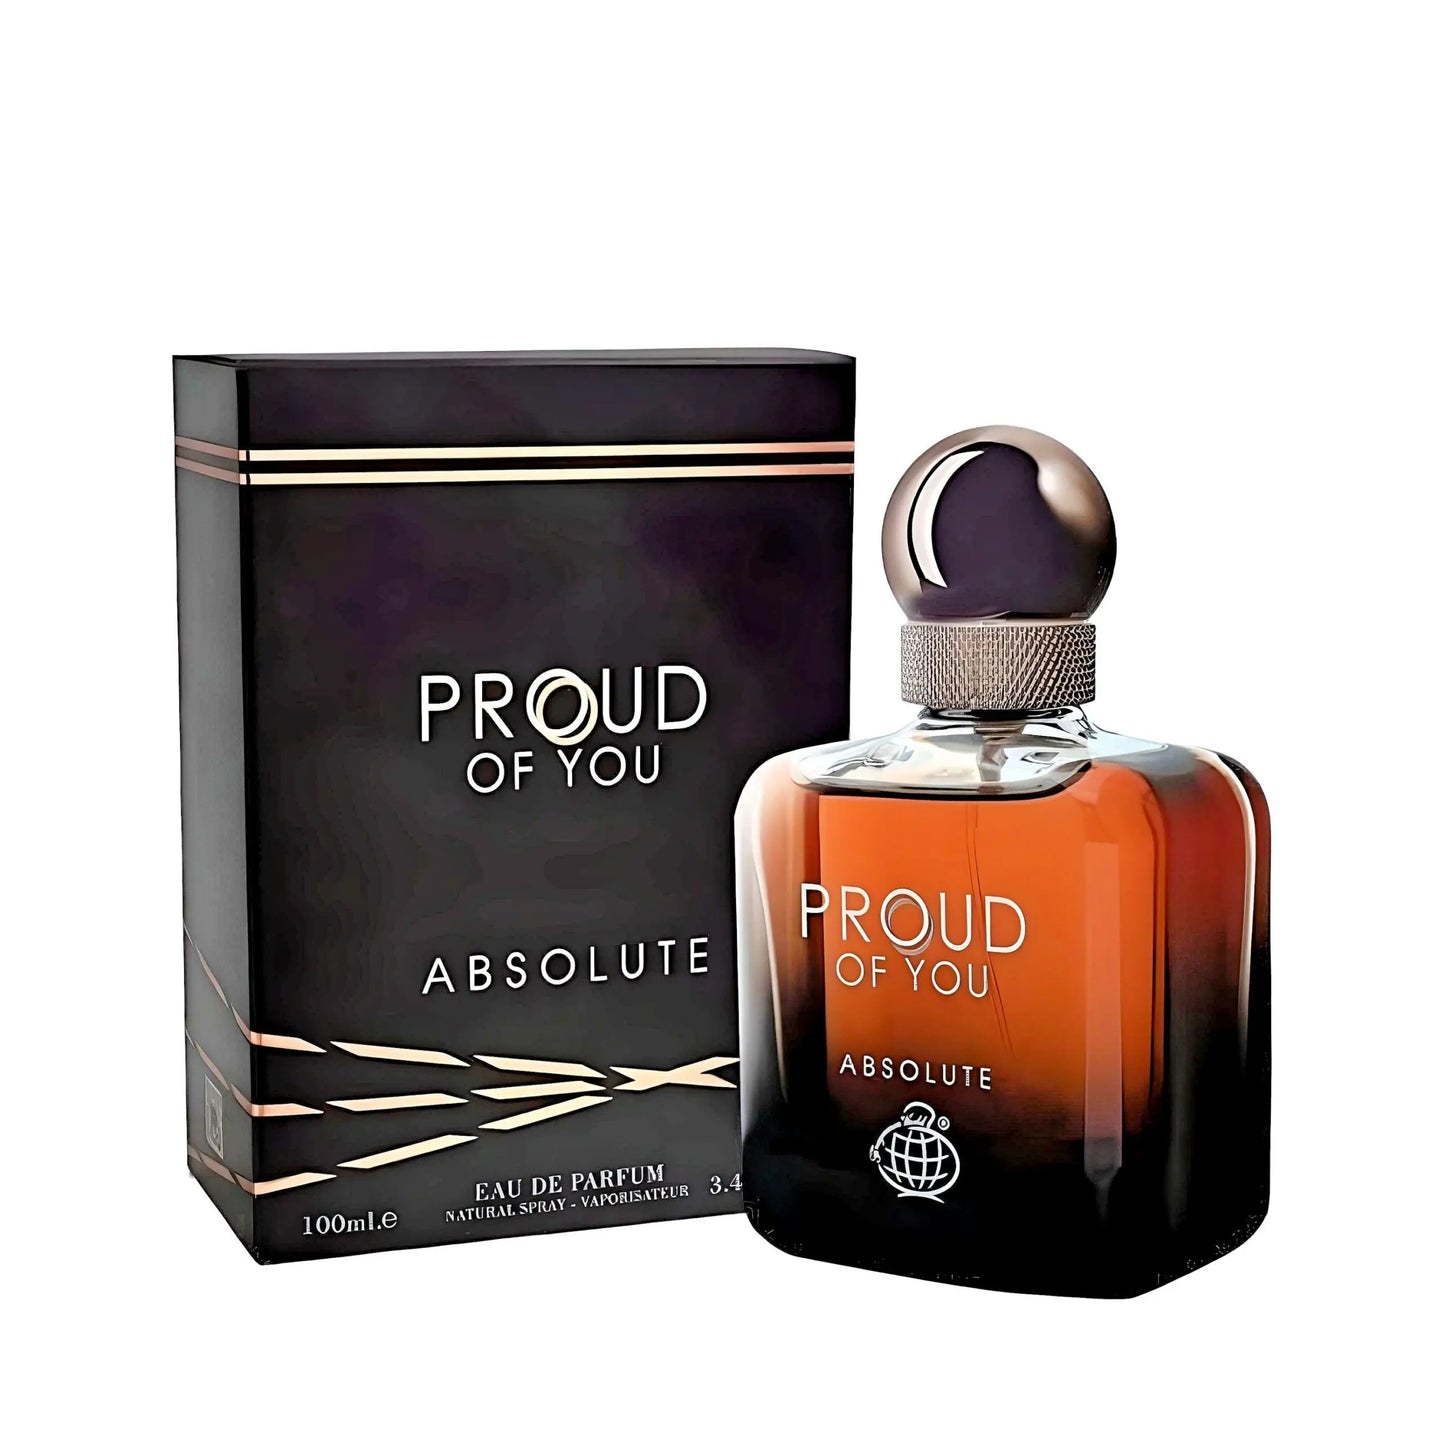 Proud of You Absolute - Fragrance World - 100 ML - Eau de Parfum -  Inspired Stronger with Your Absolutely Armaniz